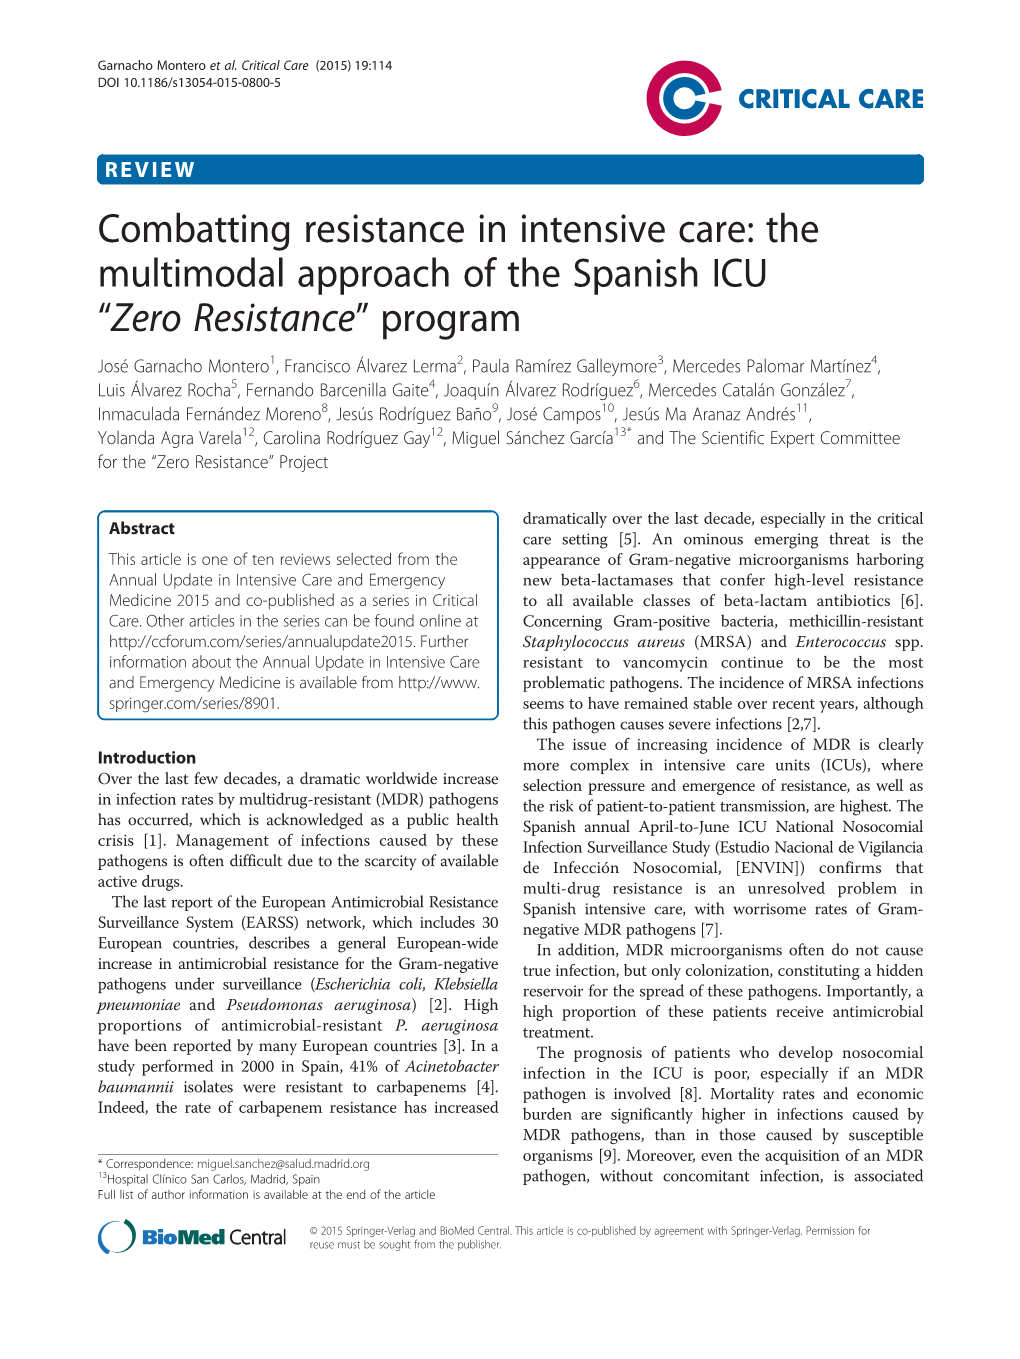 Combatting Resistance in Intensive Care